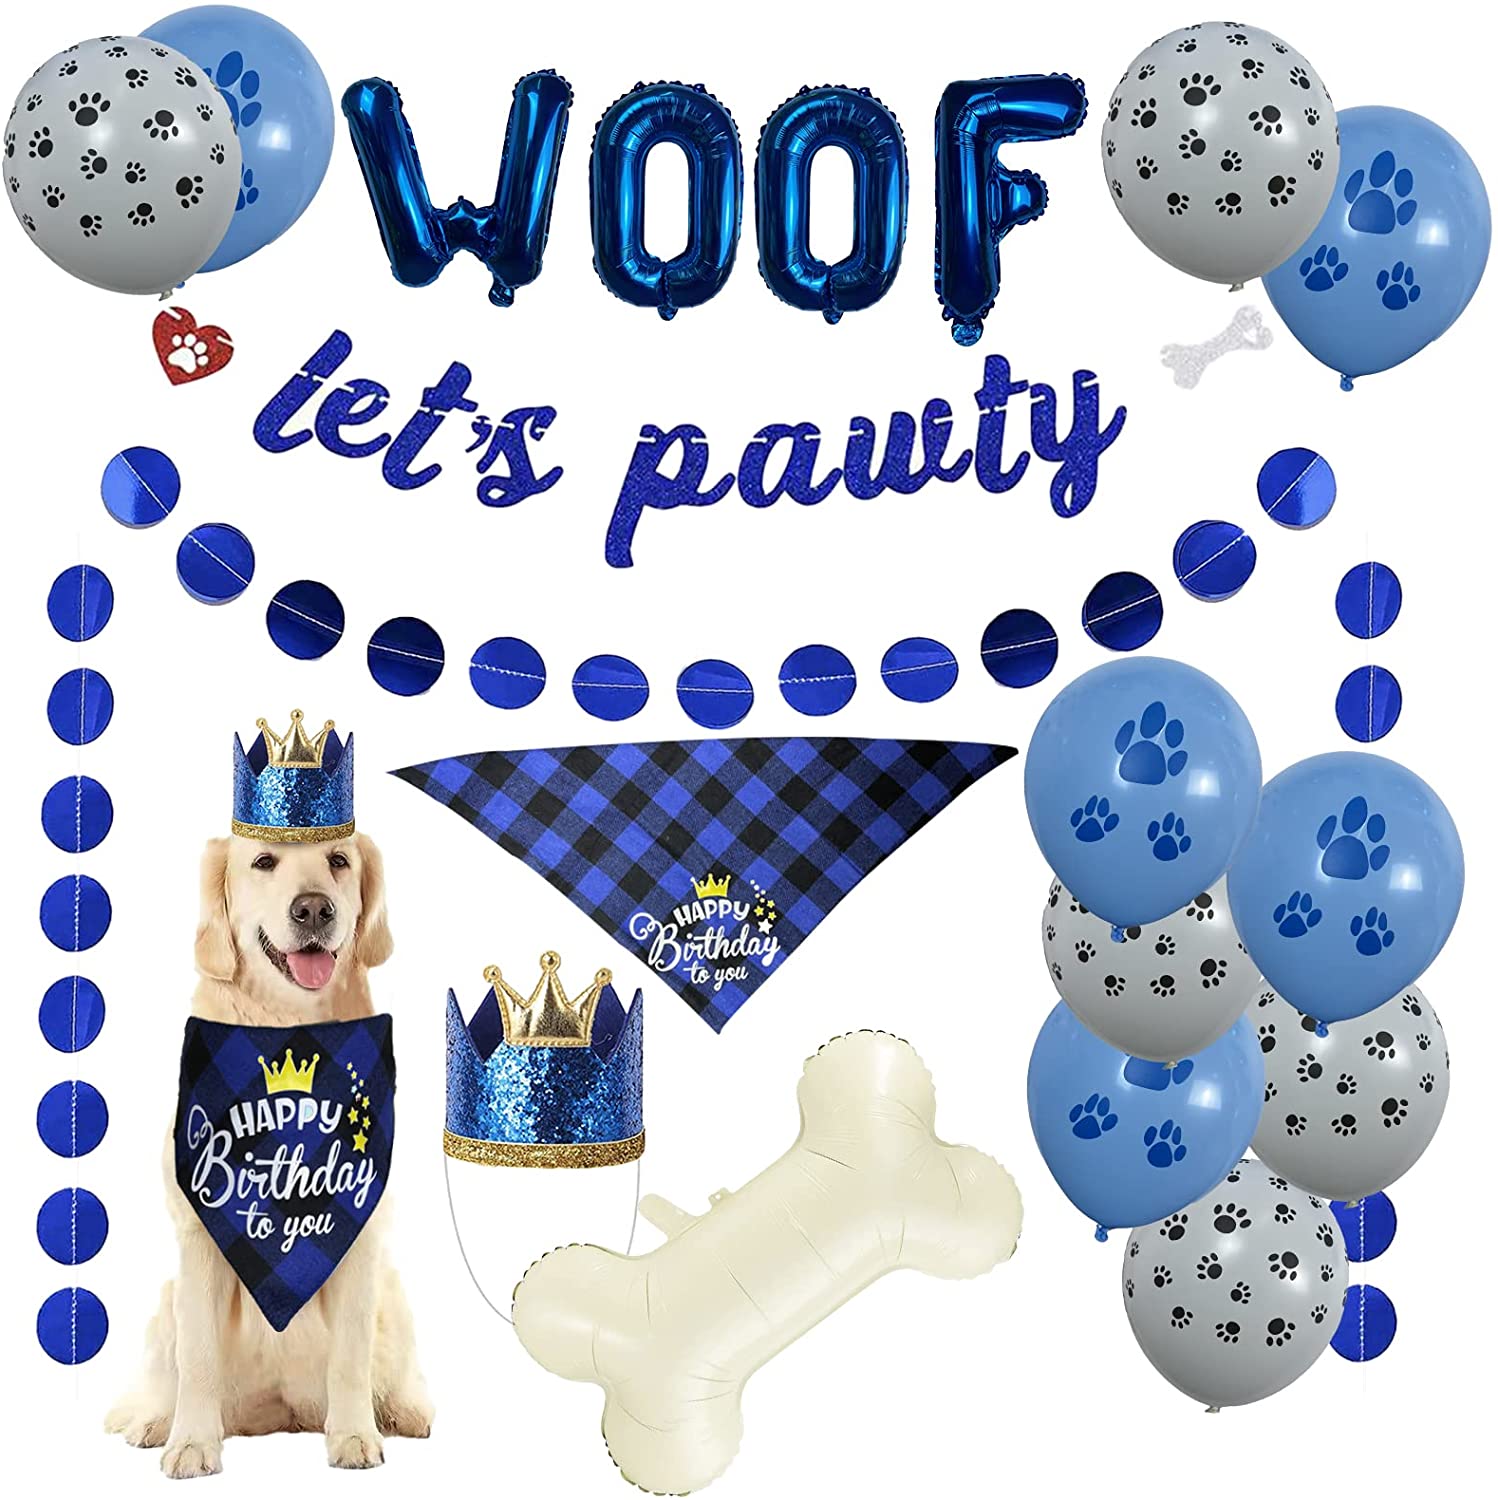 Paw Print Tablecloth Cute Table Cover for Kids Boy Girl Dog Birthday Party Supplies Blue 3 Pack Large Size Plastic 54x108 Dog Paw Print and Bone Sign Tablecloths 